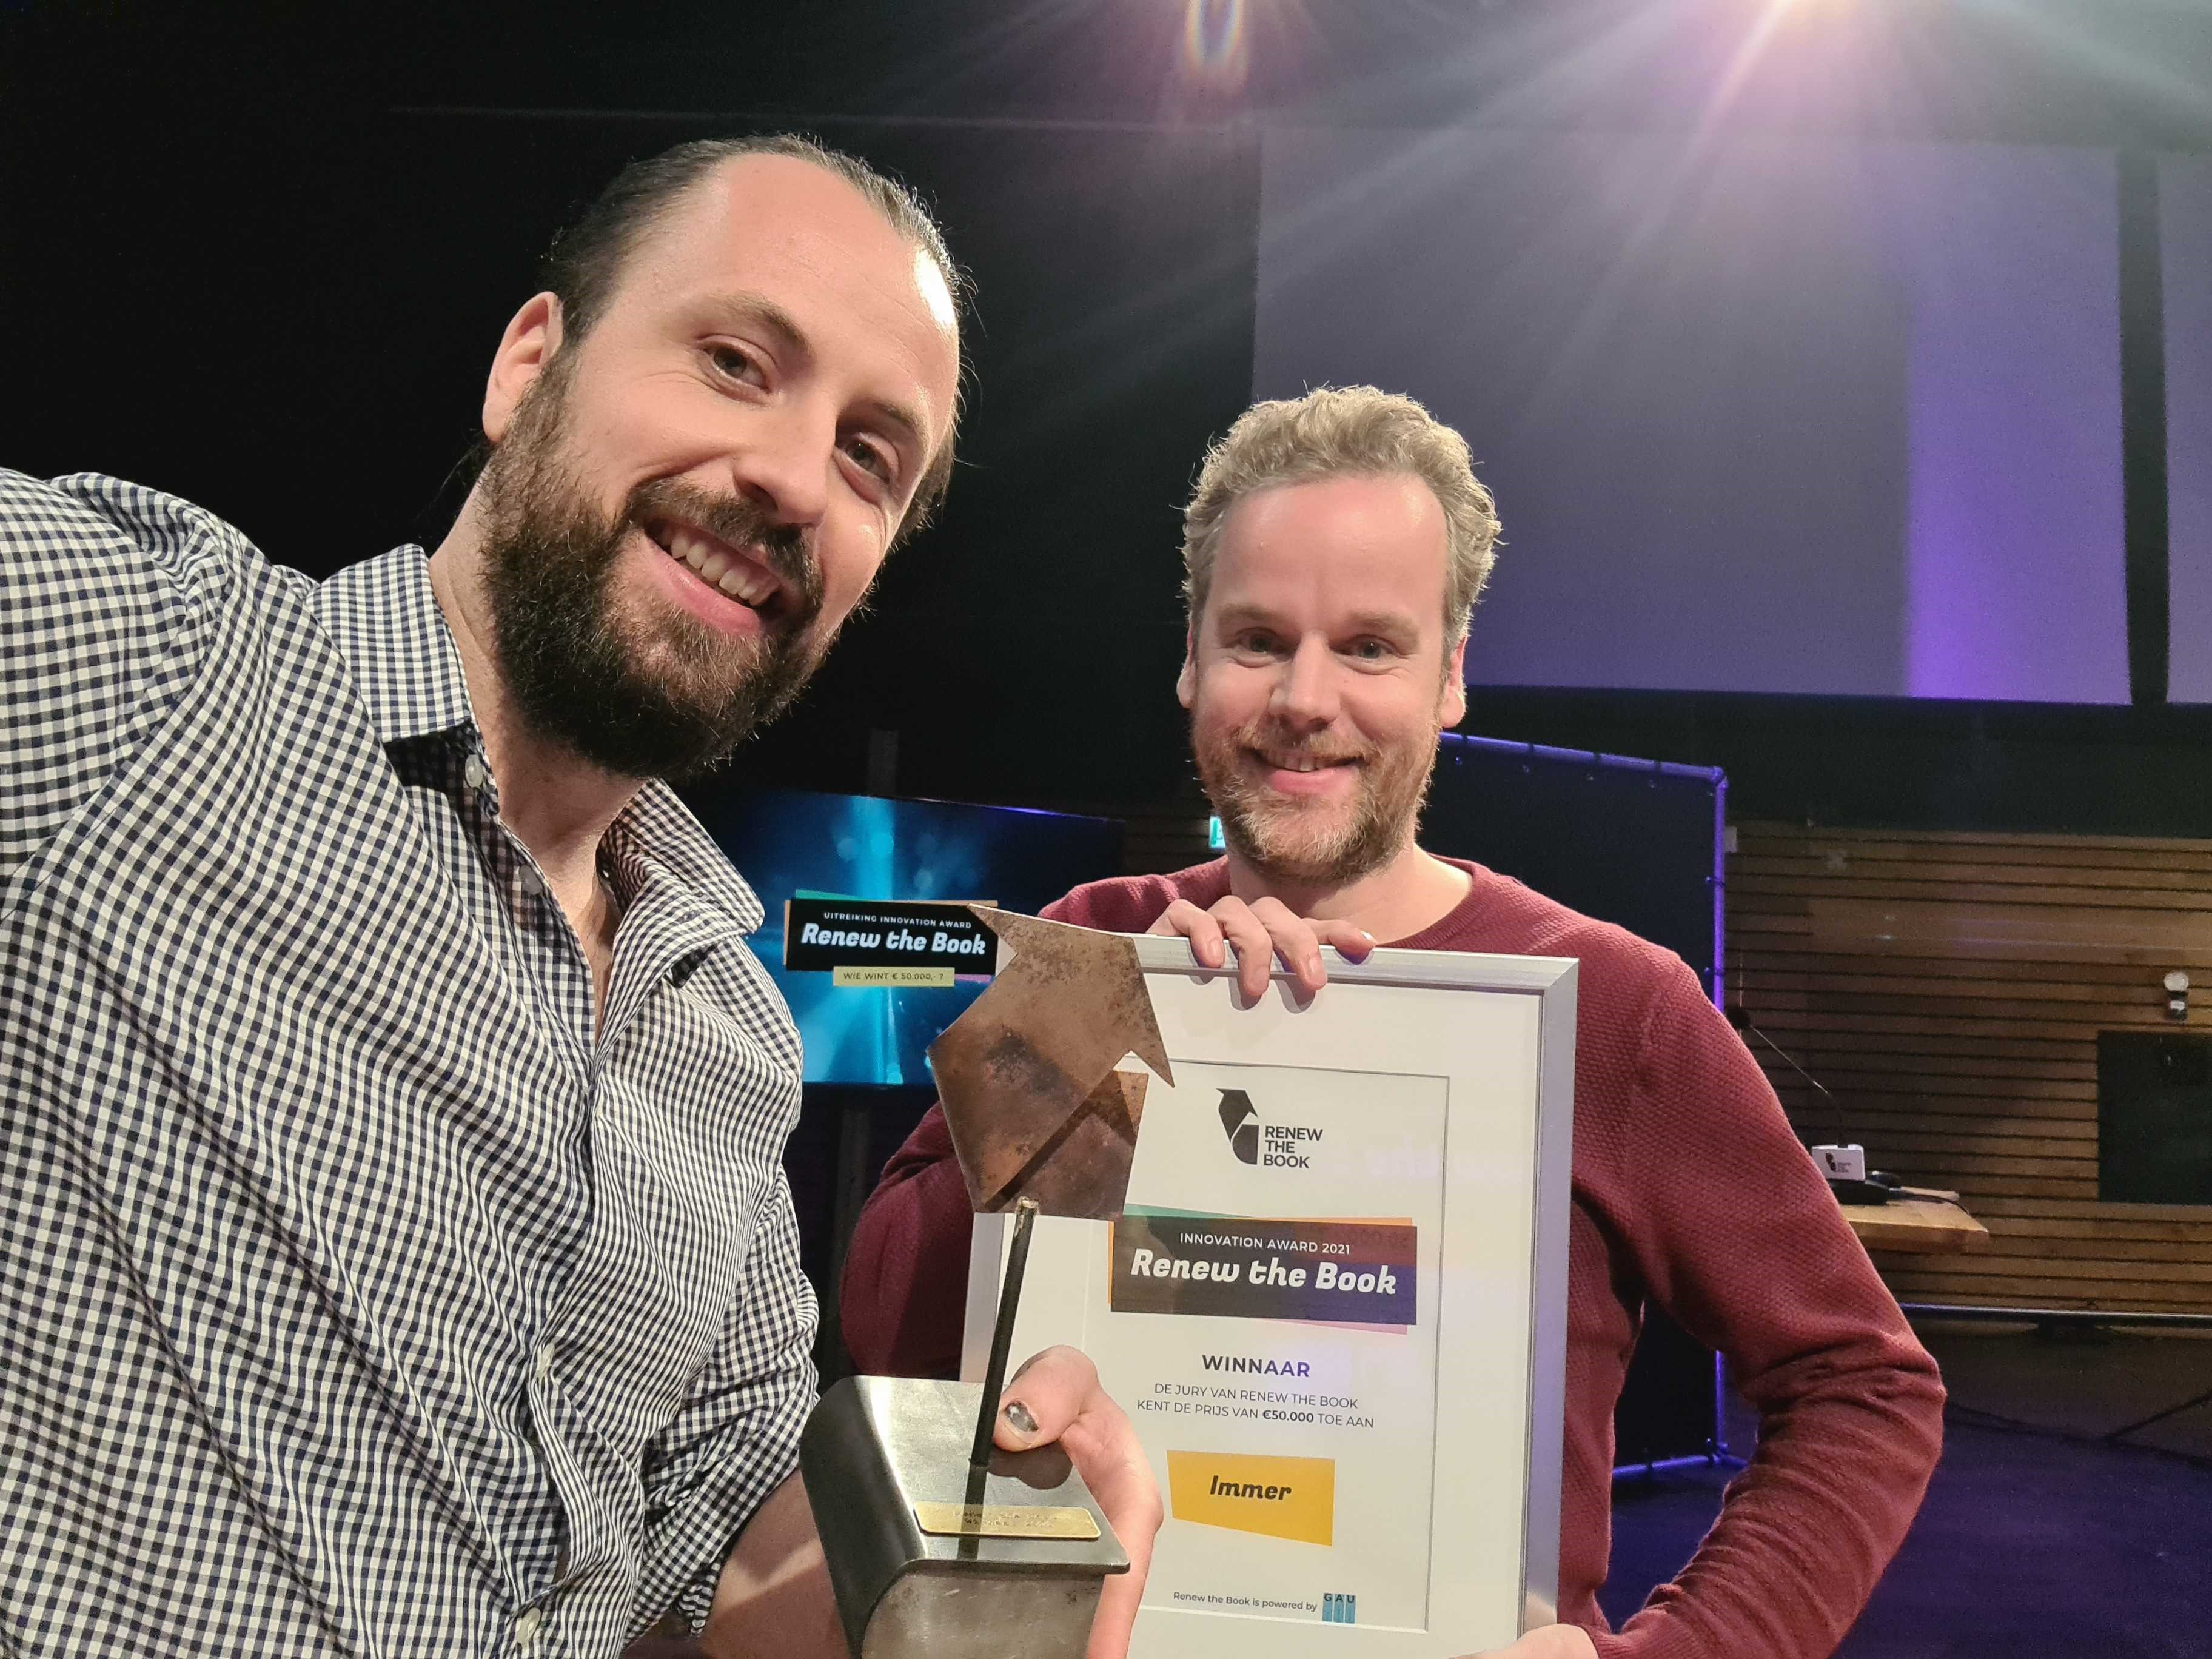 Immer wint Renew the Book Innovation Award